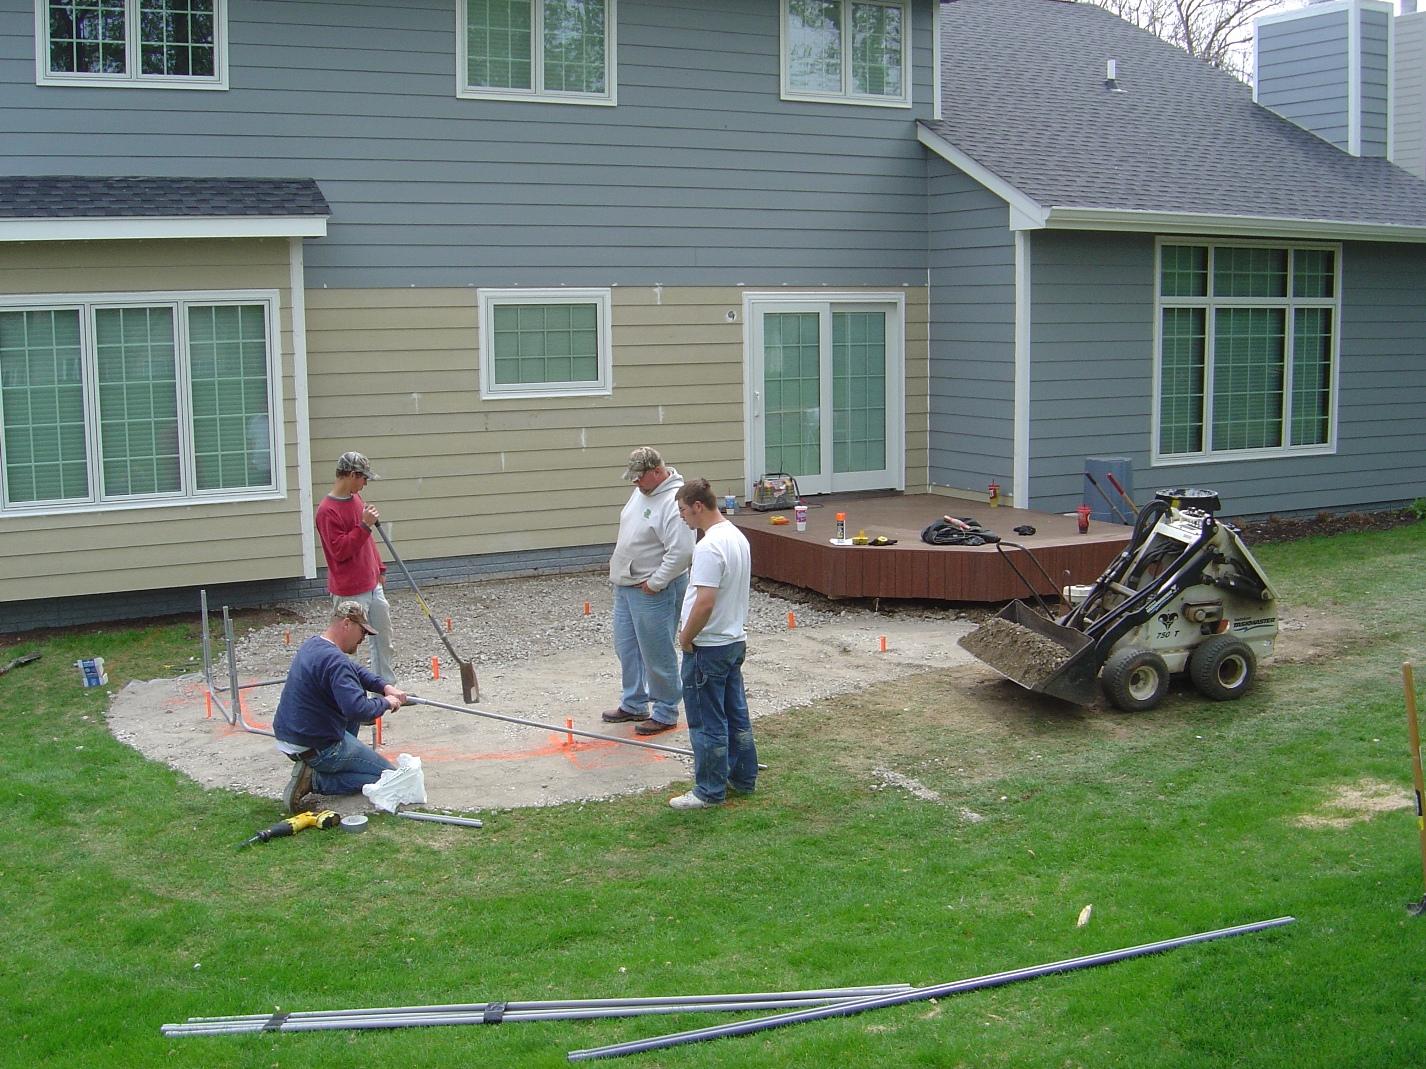 Archadeck employees working on a patio project